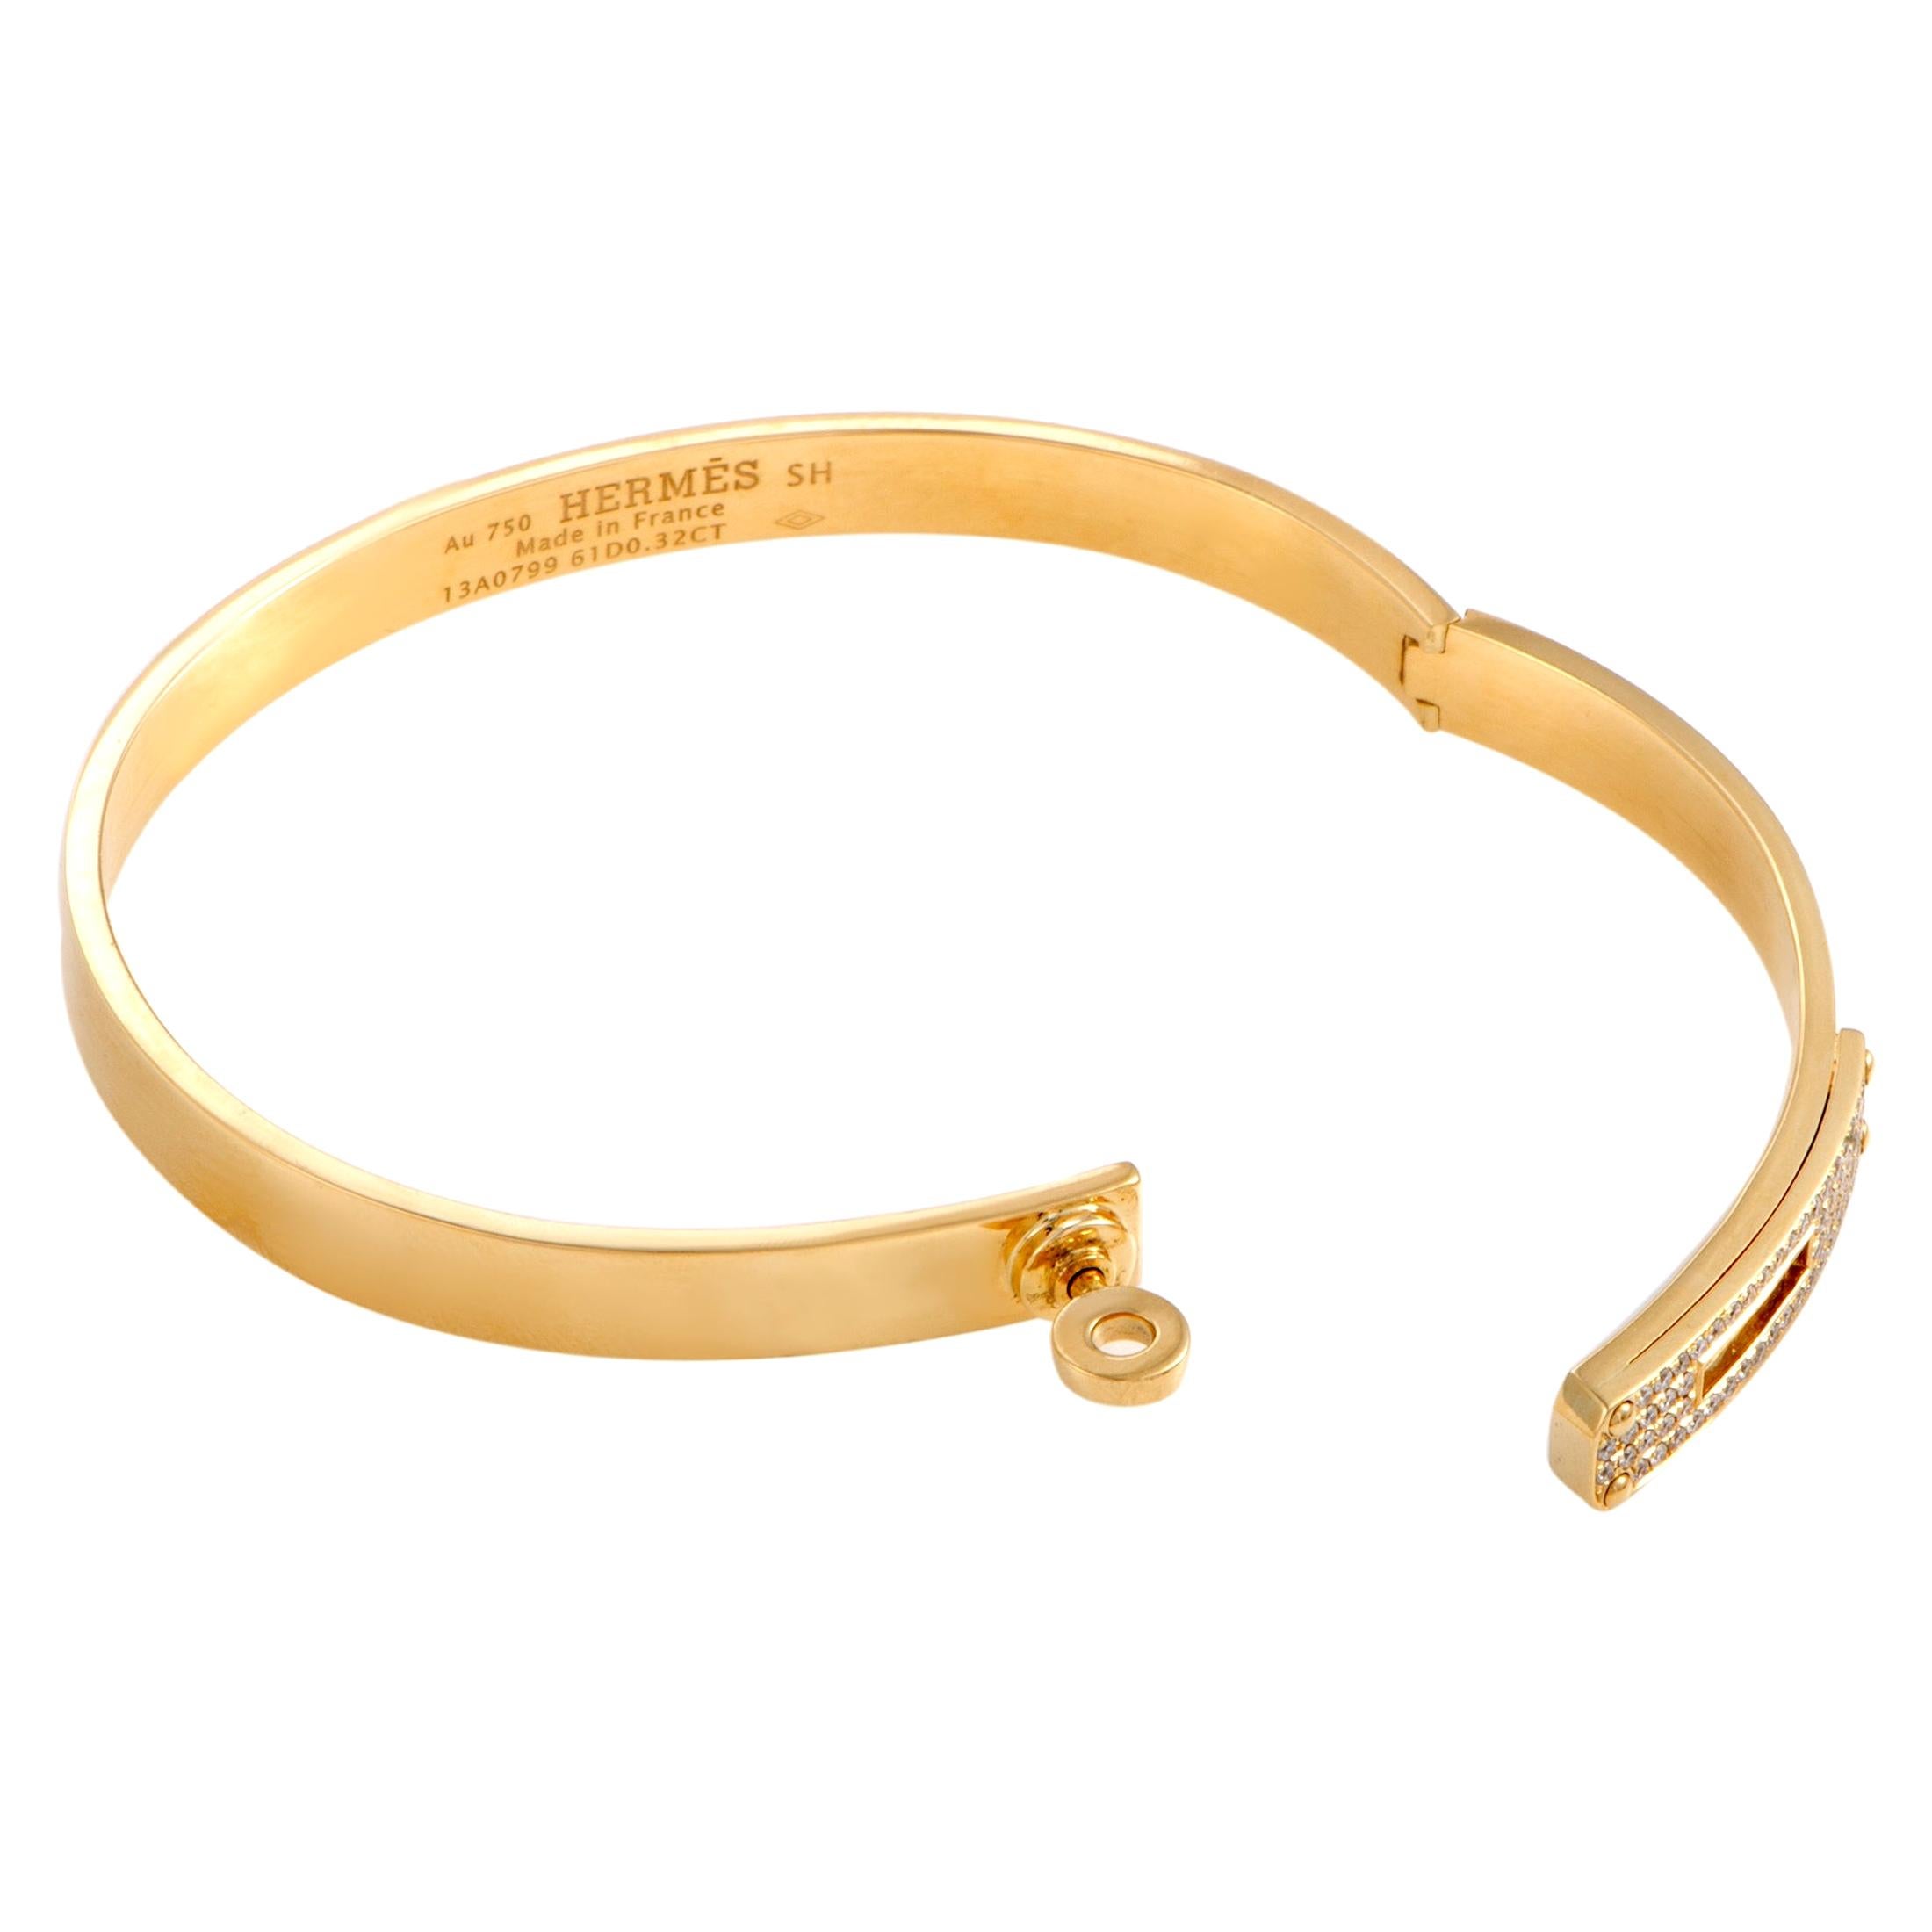 Beautifully combining the ever-prestigious gleam of gold with the effervescent allure of diamonds, this fascinating bracelet that is splendidly designed by Hermès offers an exceptionally elegant appearance. The bracelet is made of 18K yellow gold